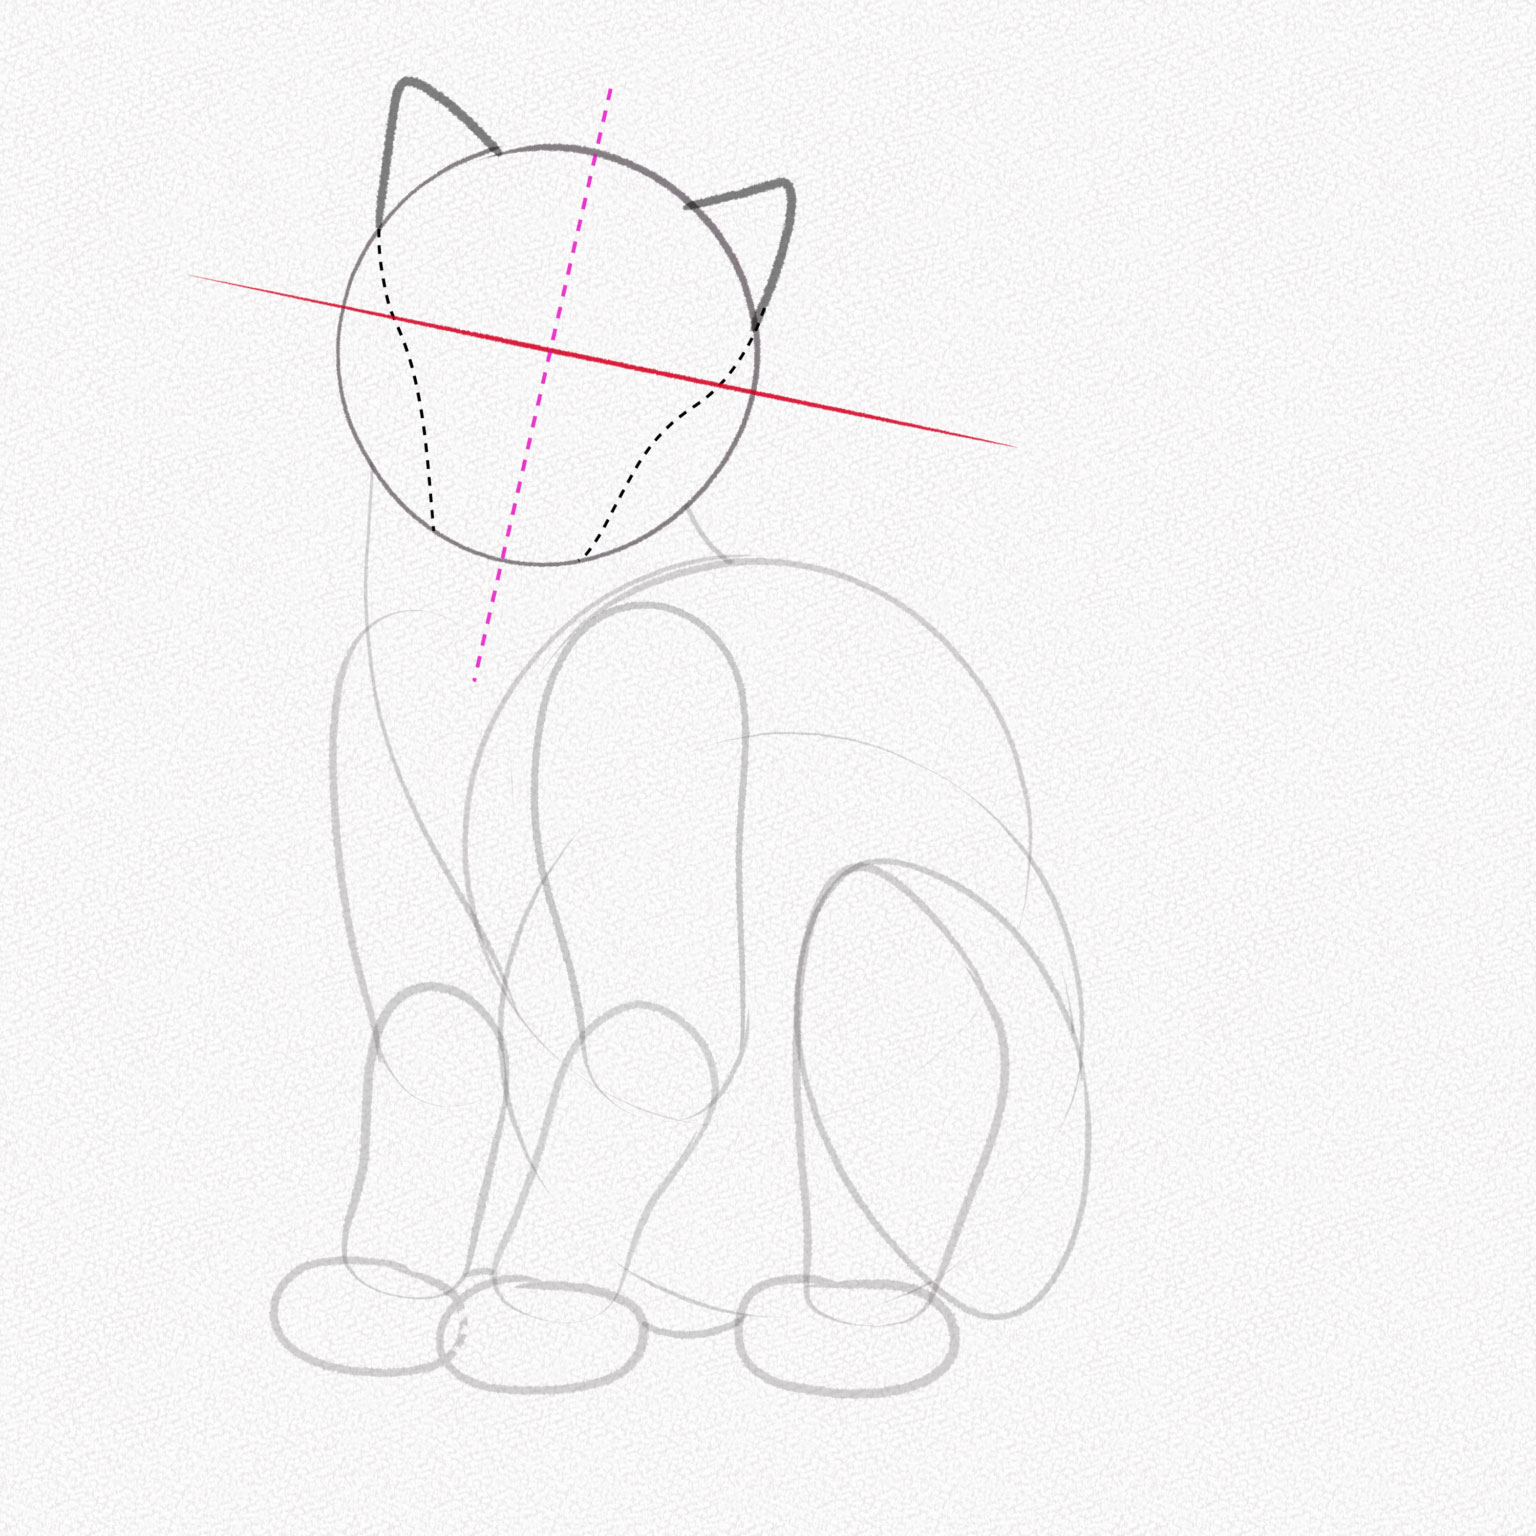 Hướng dẫn vẽ con mèo How to Draw A Cat CoNgaMamnonDaybeve  YouTube